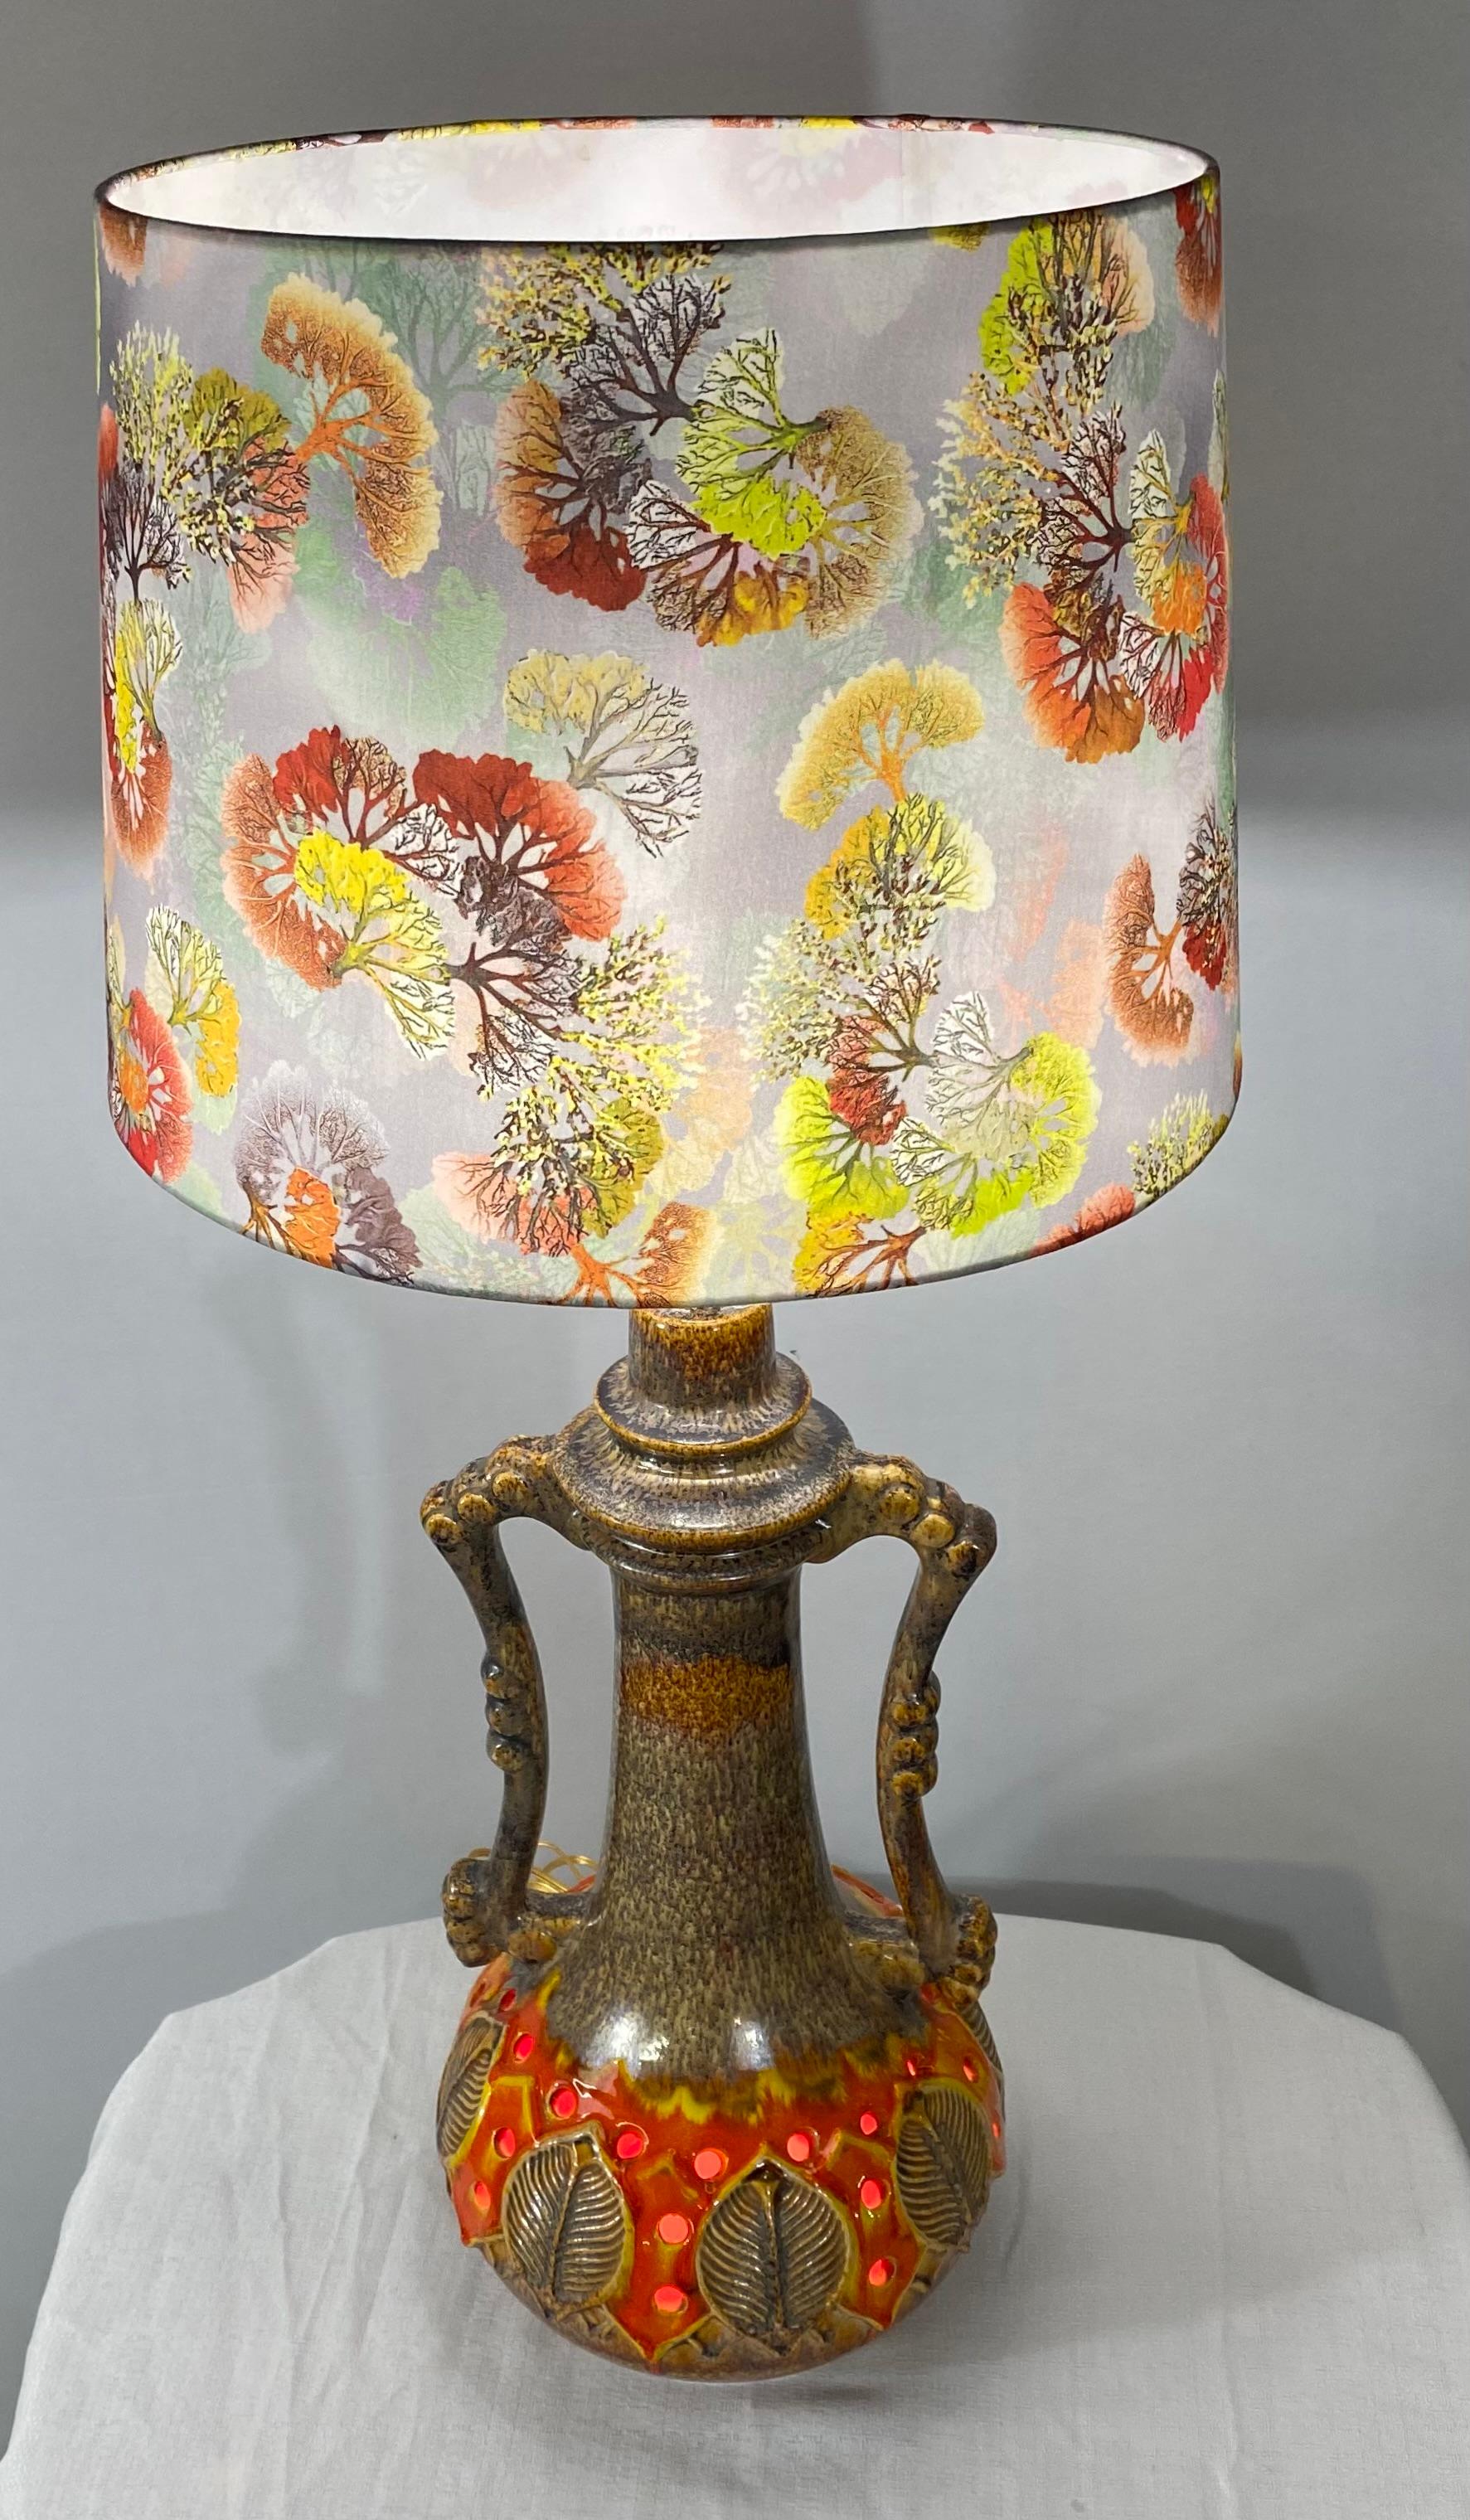 A lovely and one of a kind mid-century jar or urn converted table lamp. The finely glazed ceramic lamp features two nicely carved handles and beautiful leaves design around the lamp body. The earthy orange and brown colors tone of the lamp are